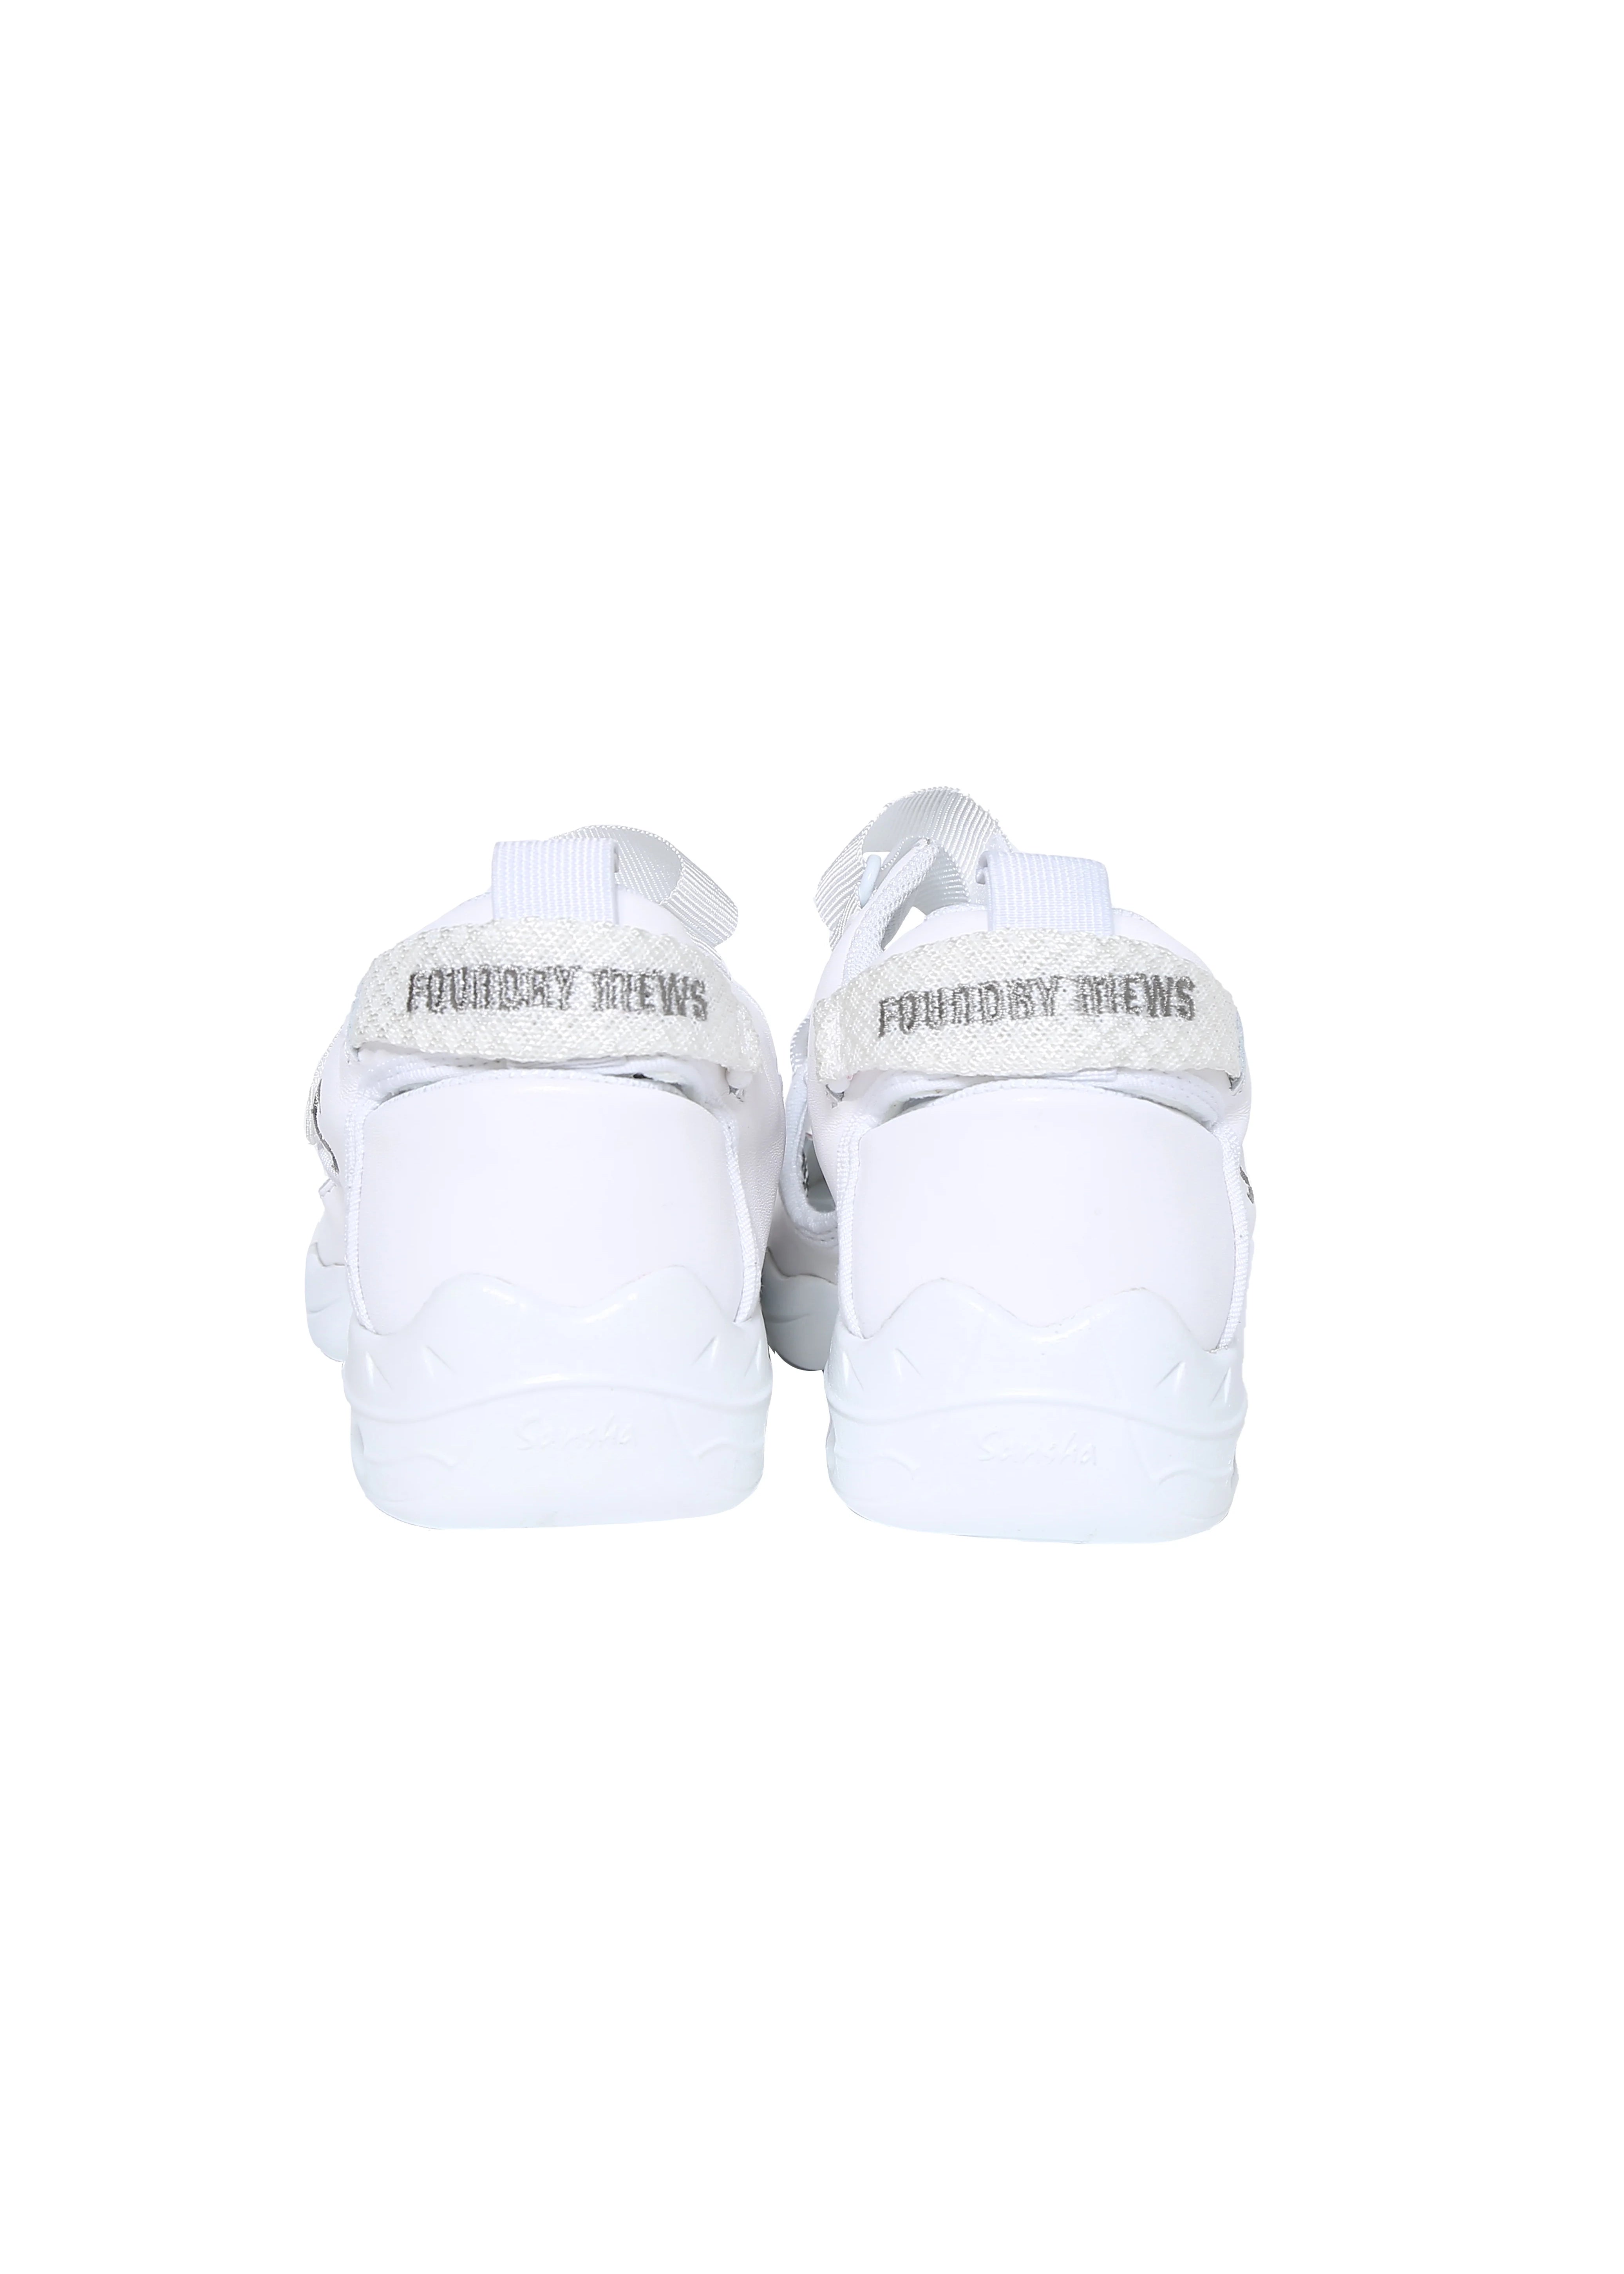 【MADE TO ORDER】Foundrymews / White canvas shoes